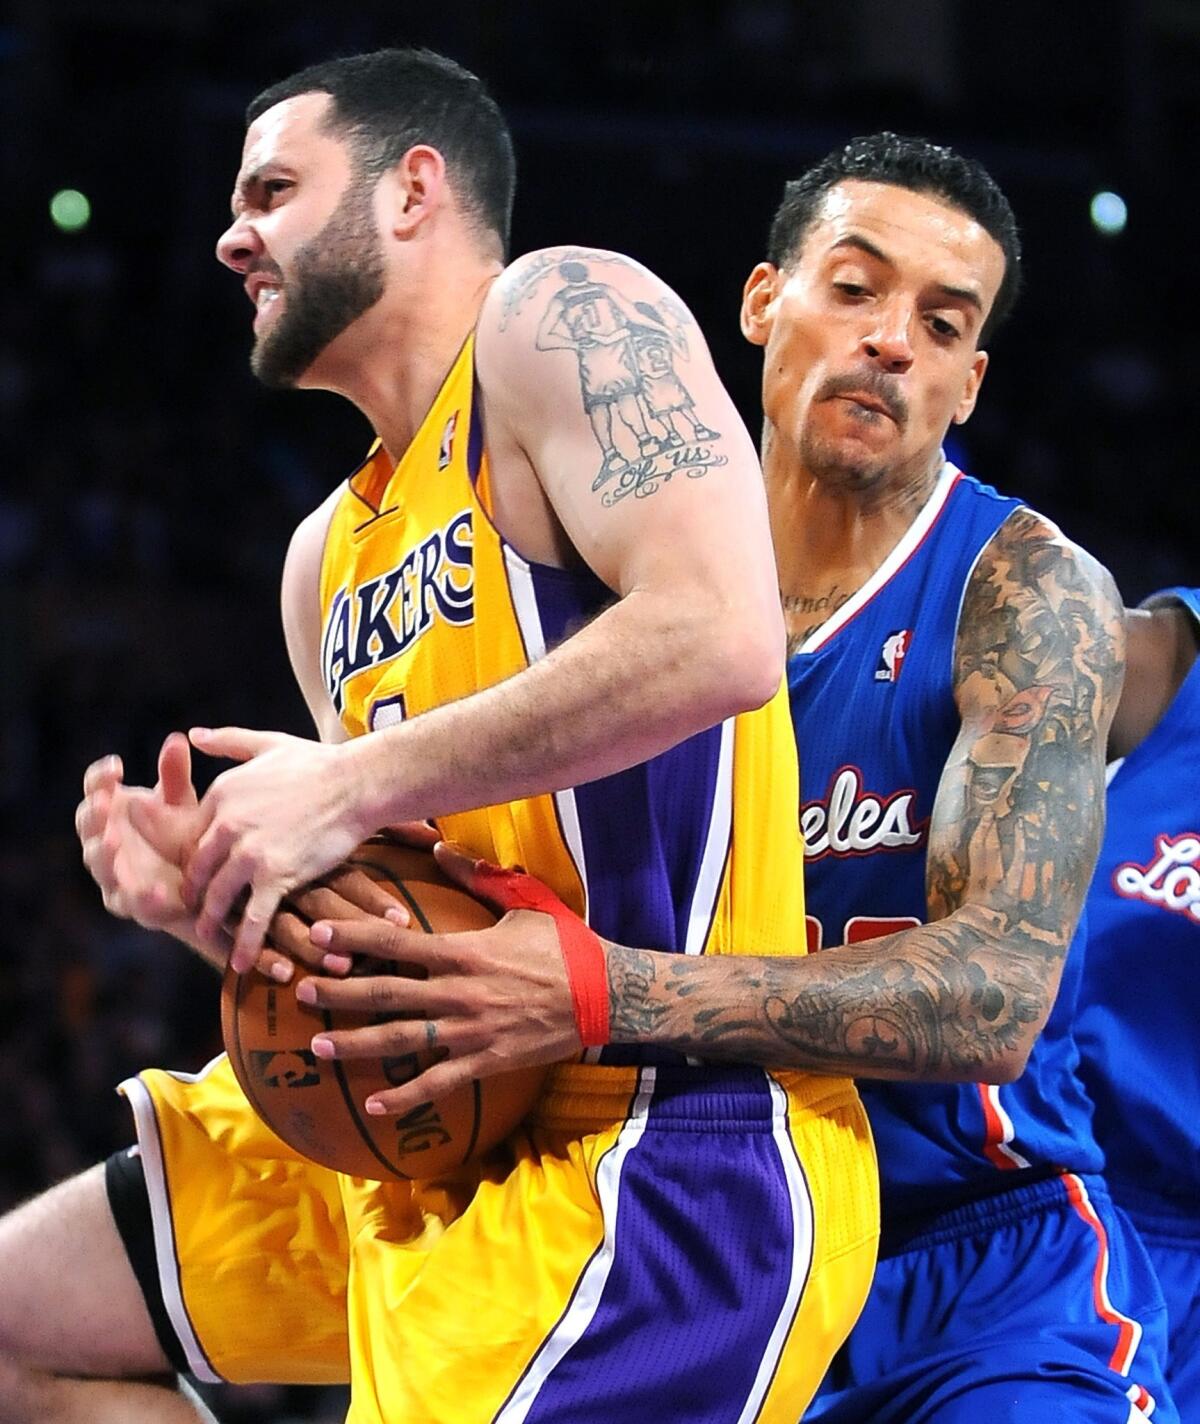 Lakers point guard Jordan Farmar, being fouled by Clippers forward Matt Barnes, is averaging 10.4 points and 4.7 assists.